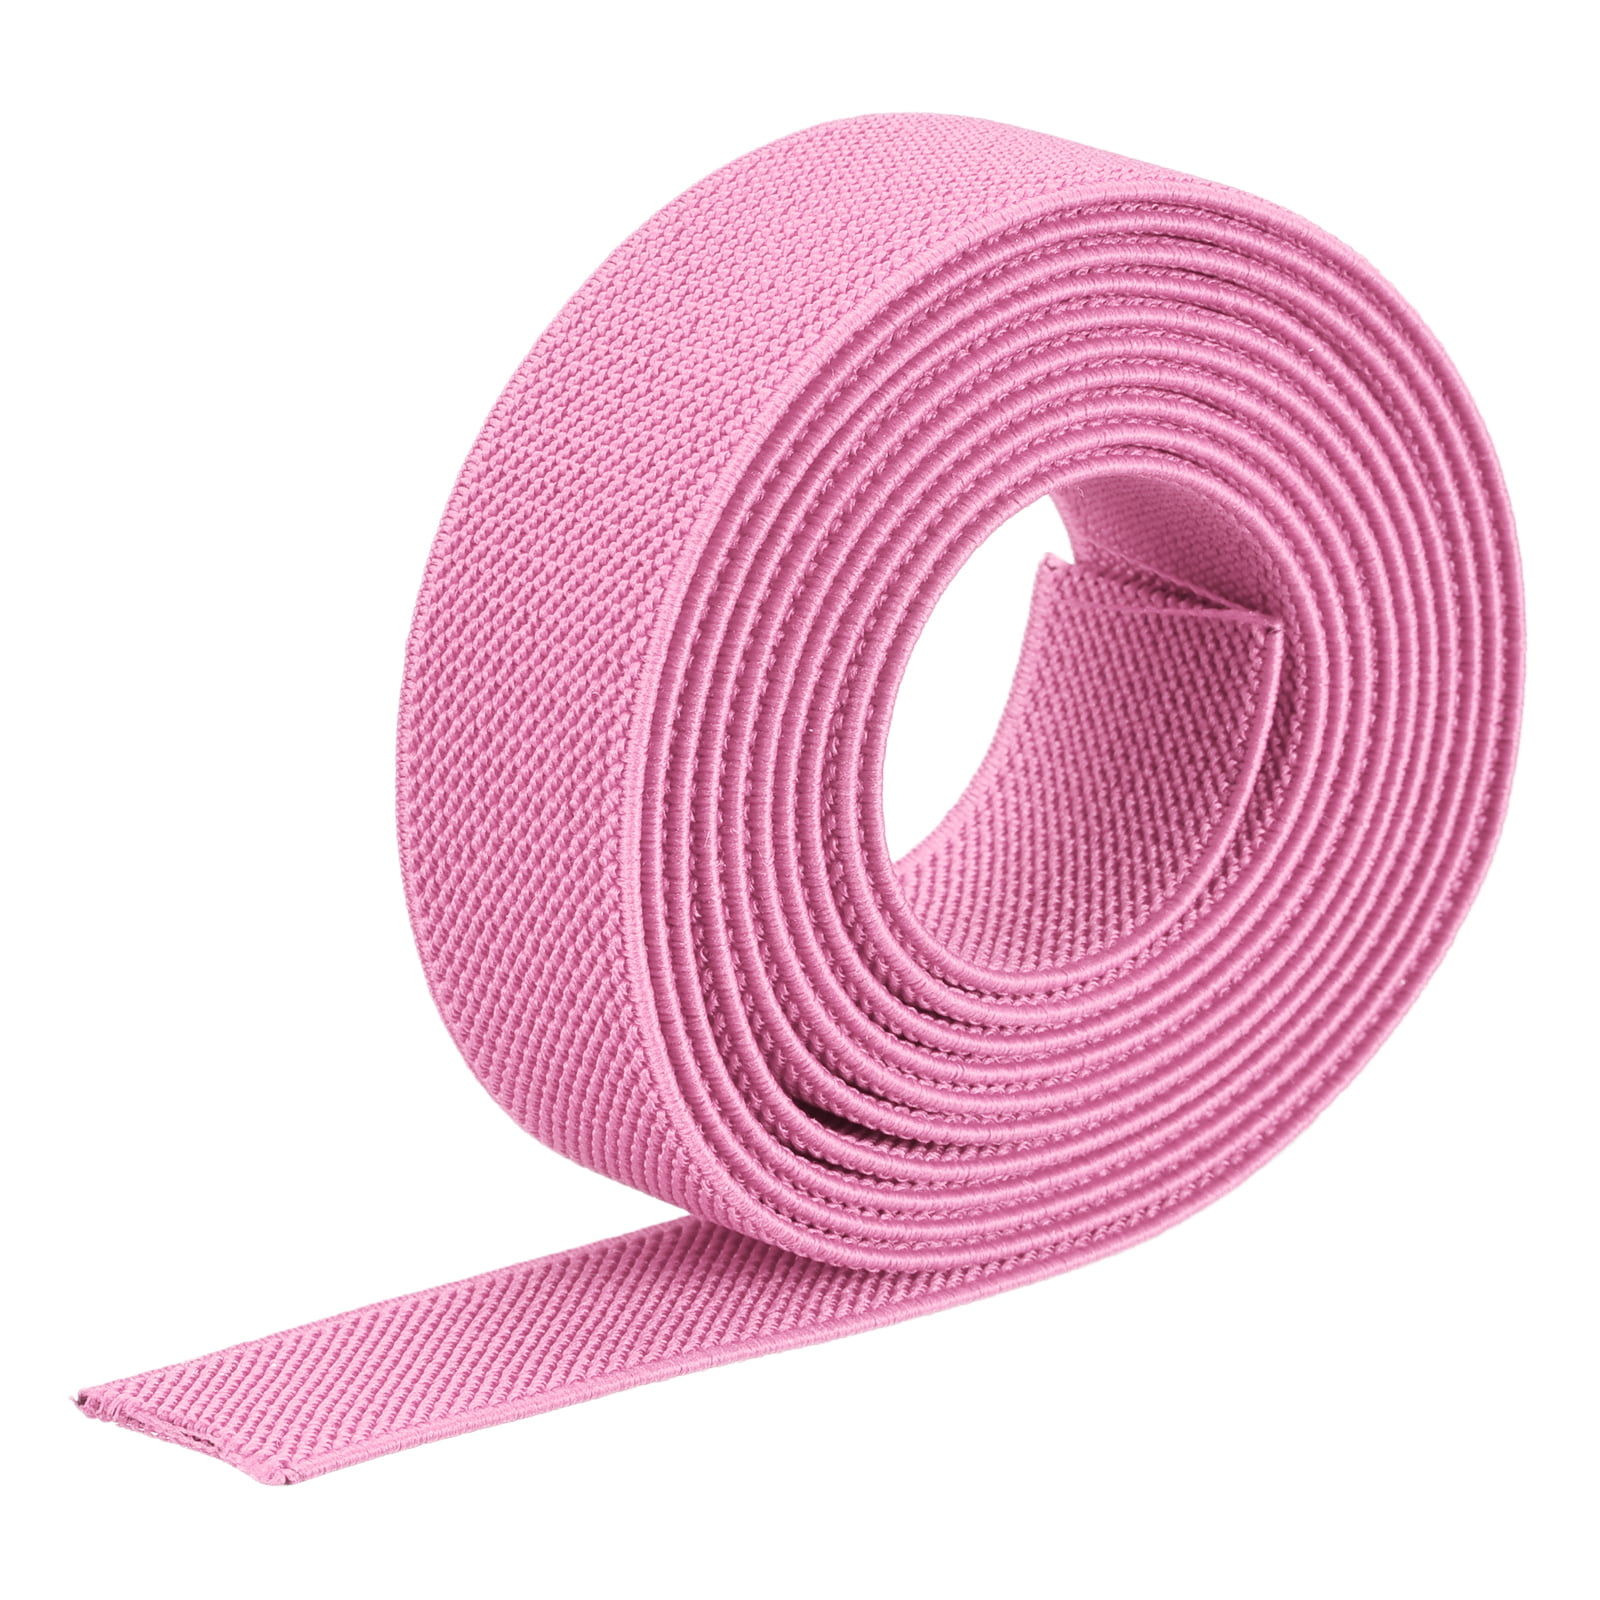 2PCS Sewing Elastic Band 5 Yards 3/4 Inch Knit Double-Side Elastic Spool  Heavy Stretch High Elasticity Strap Material for Sewing Crafts DIY